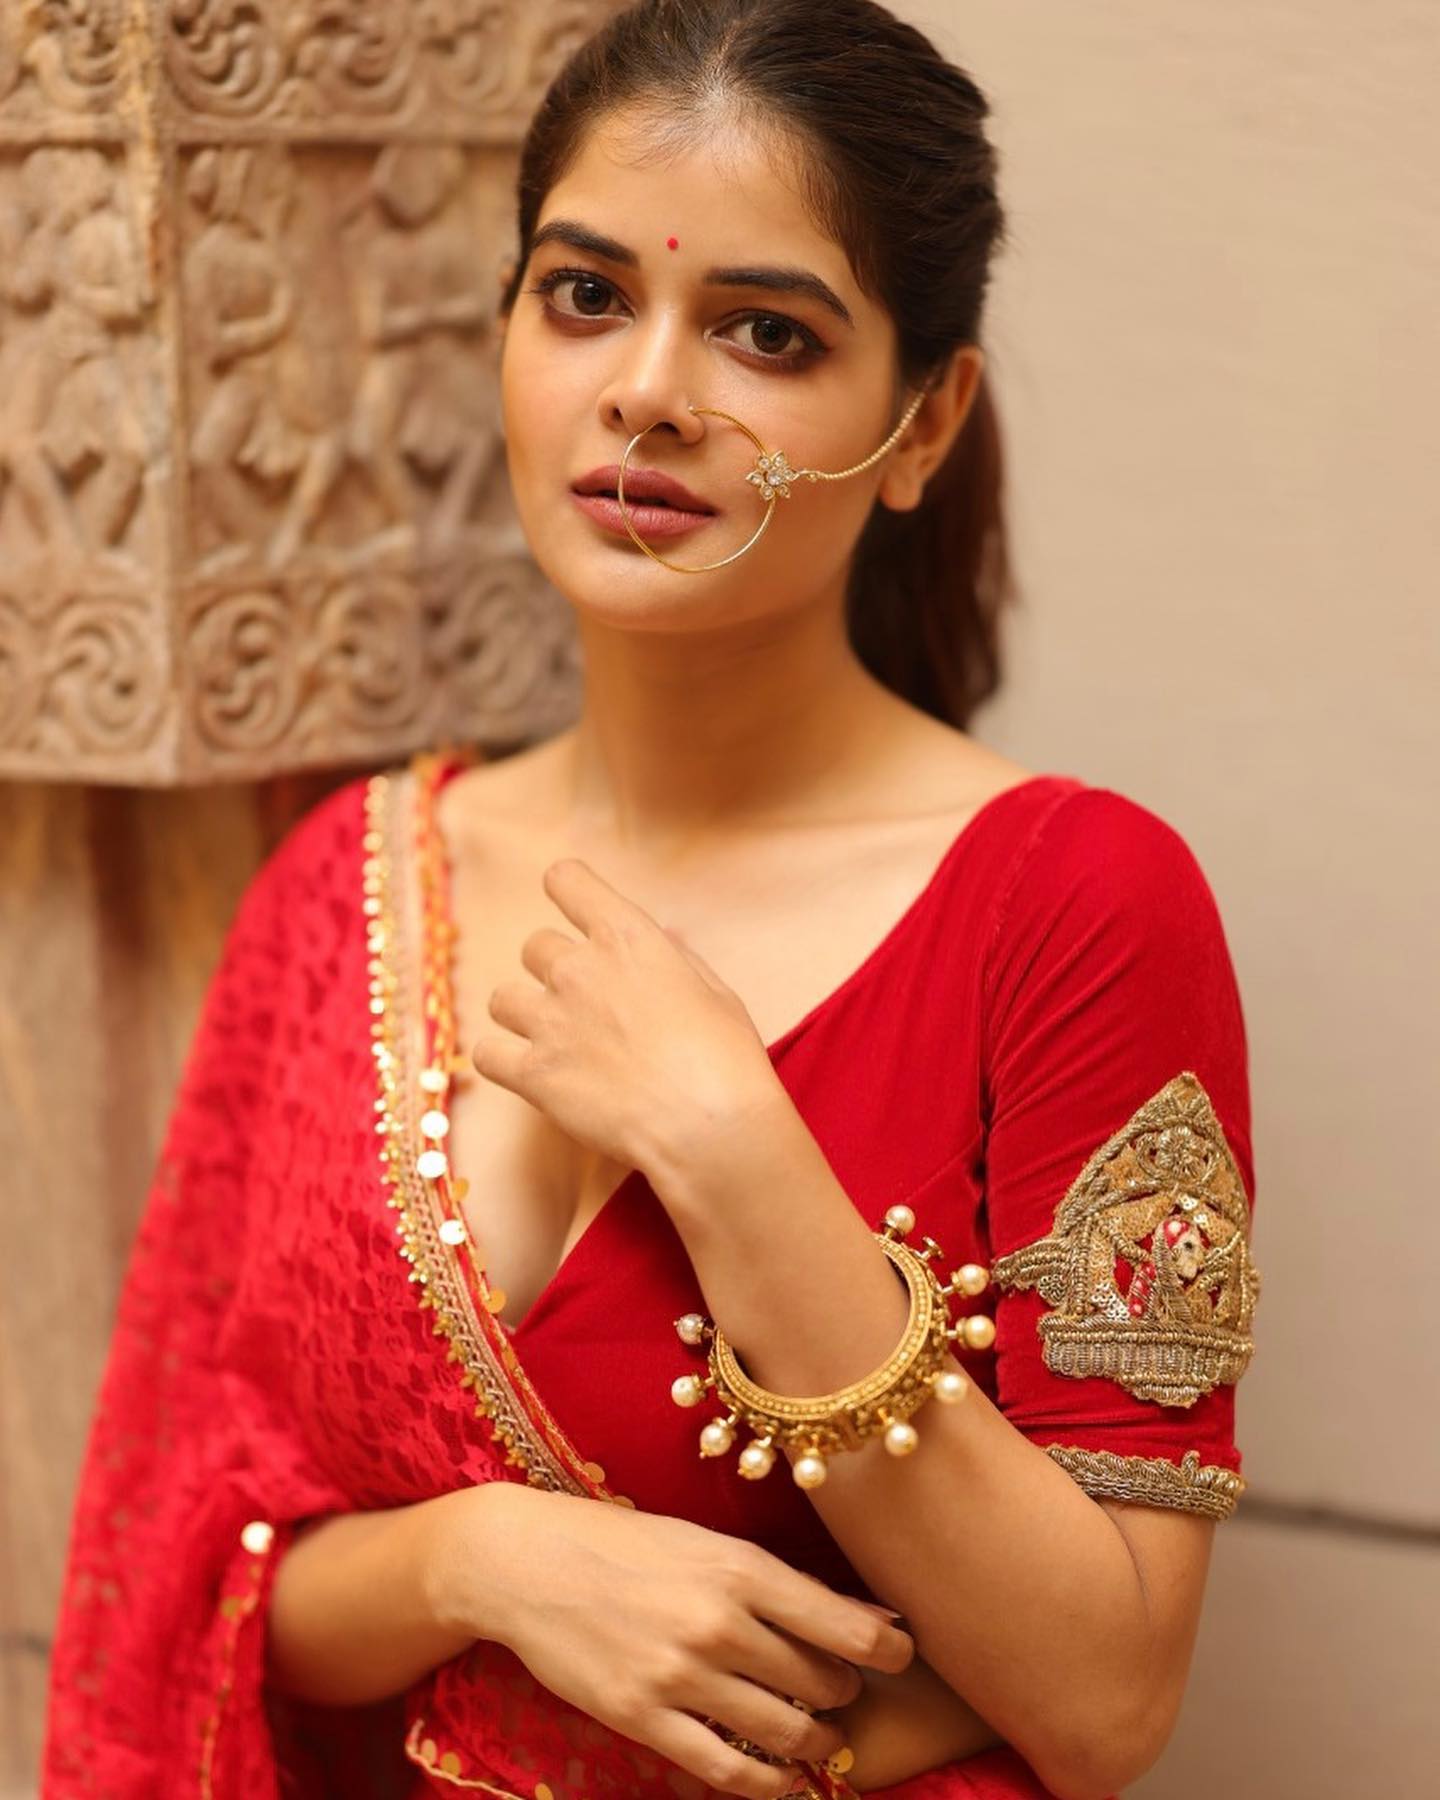 Madhumita-Sarcar-looks-alluring-in-Red-Leheng-See-the-pictures-06-Bengalplanet.com